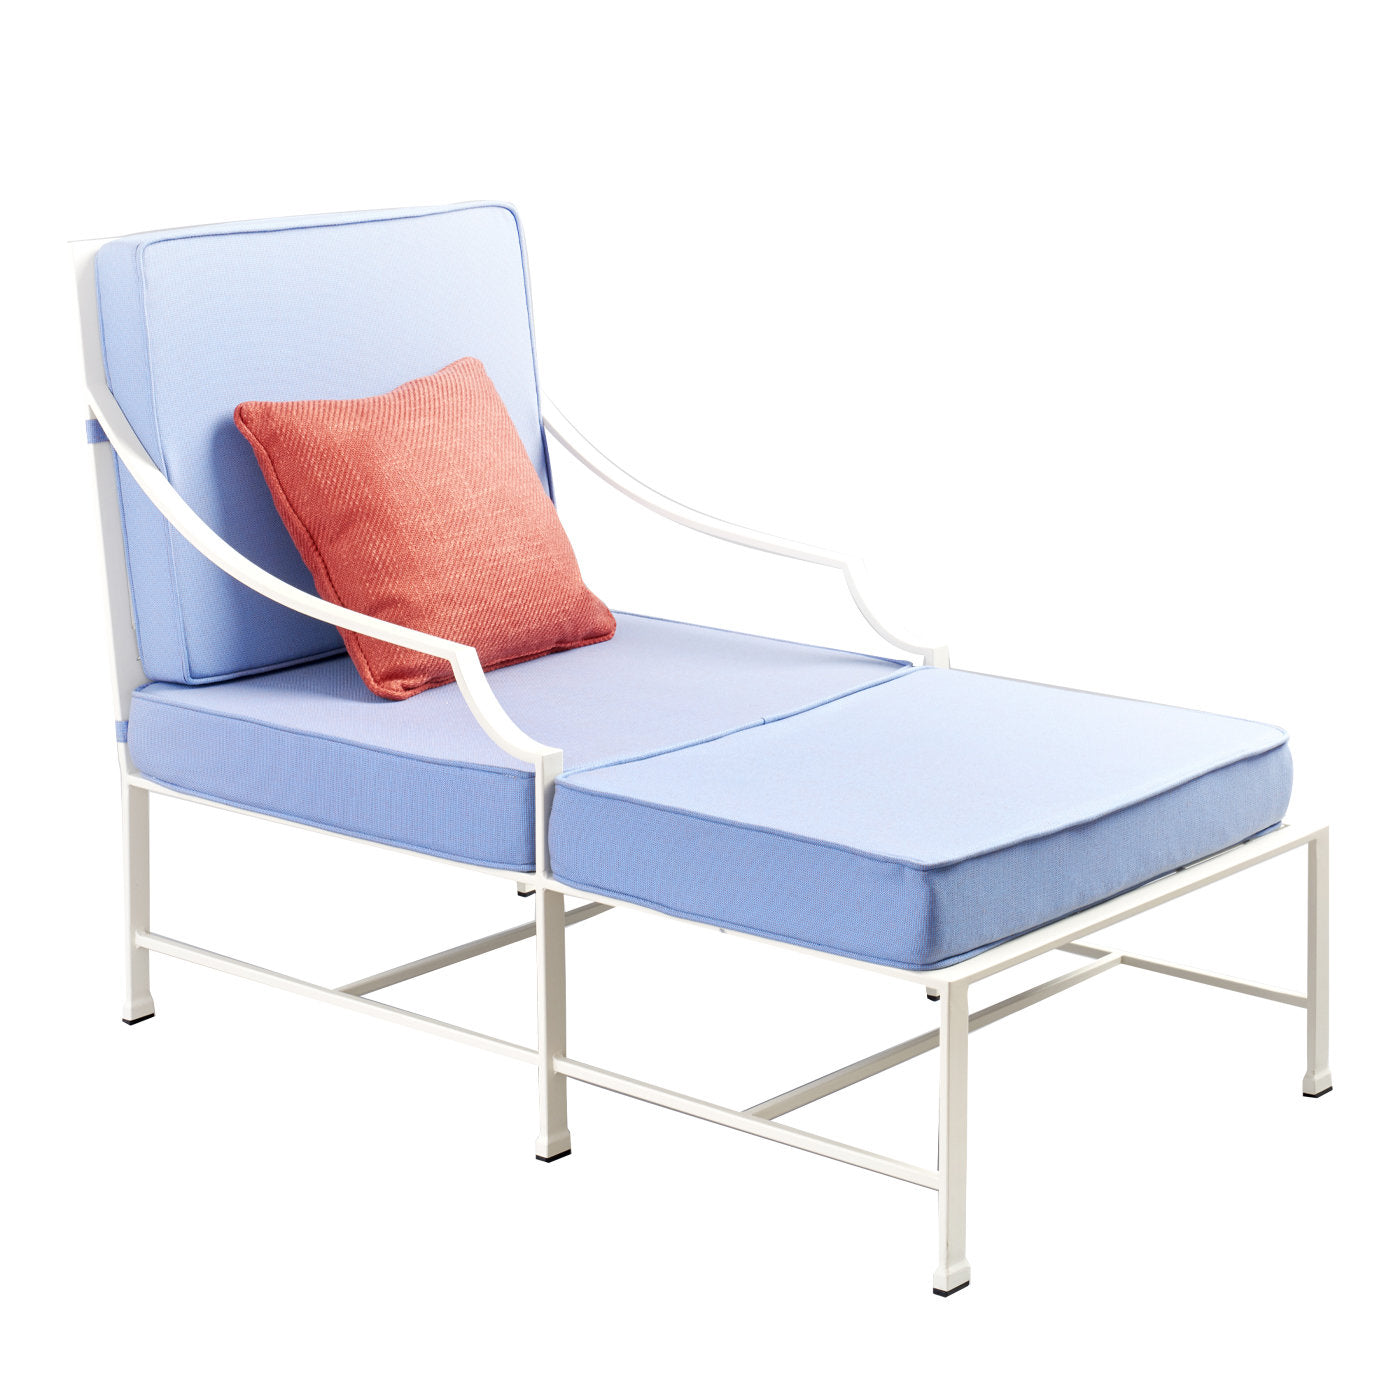 Perennial Chaise Lounge by Silvia Refaldi in Stainless Steel - Main view